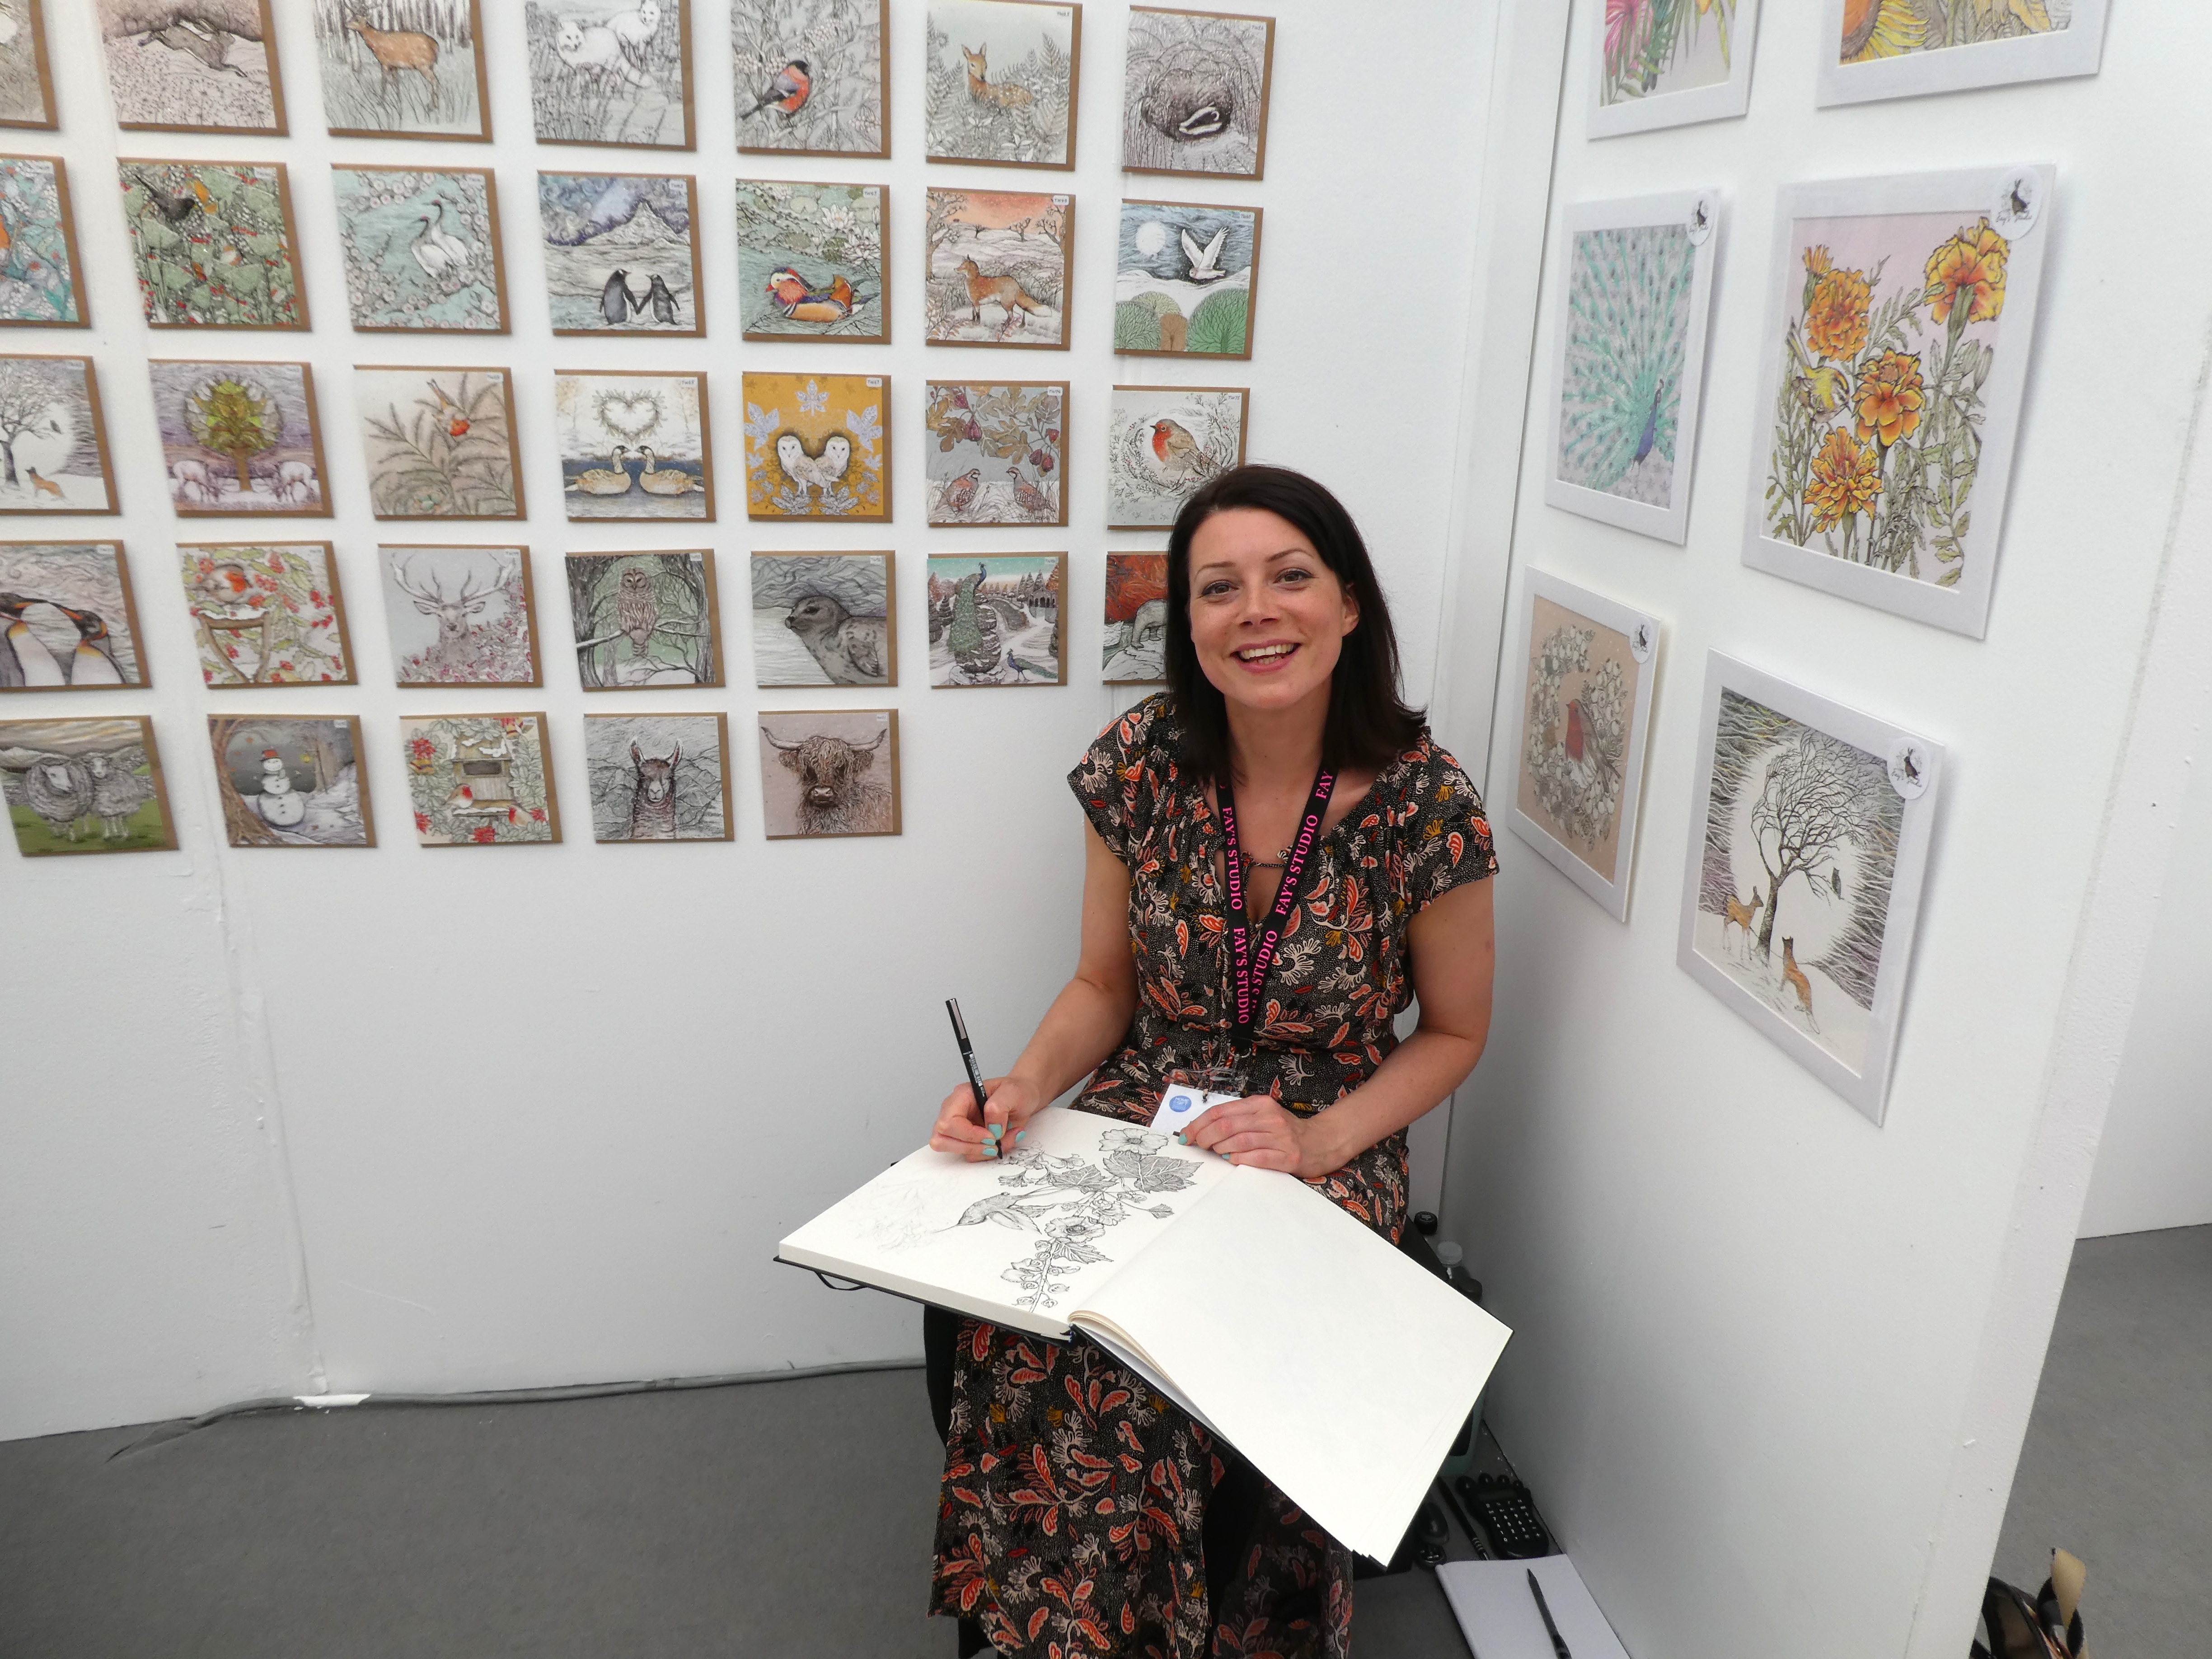 Above: No rest for the talented! Faye Miladowska of Fay’s Studios was working on two detailed pointillist designs in between customers coming on the stand.